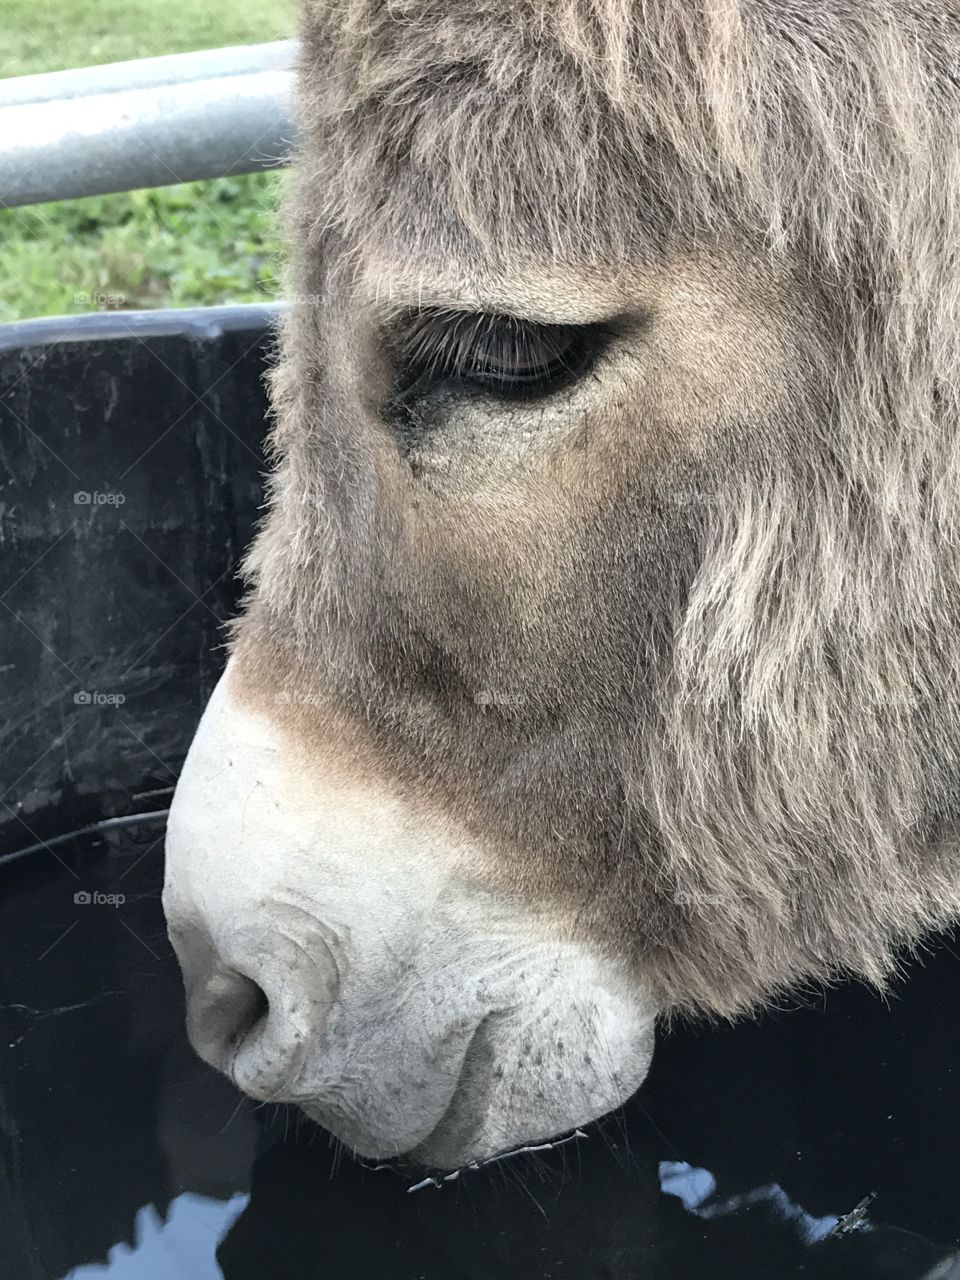 Our donkey named Earl having a drink of fresh water